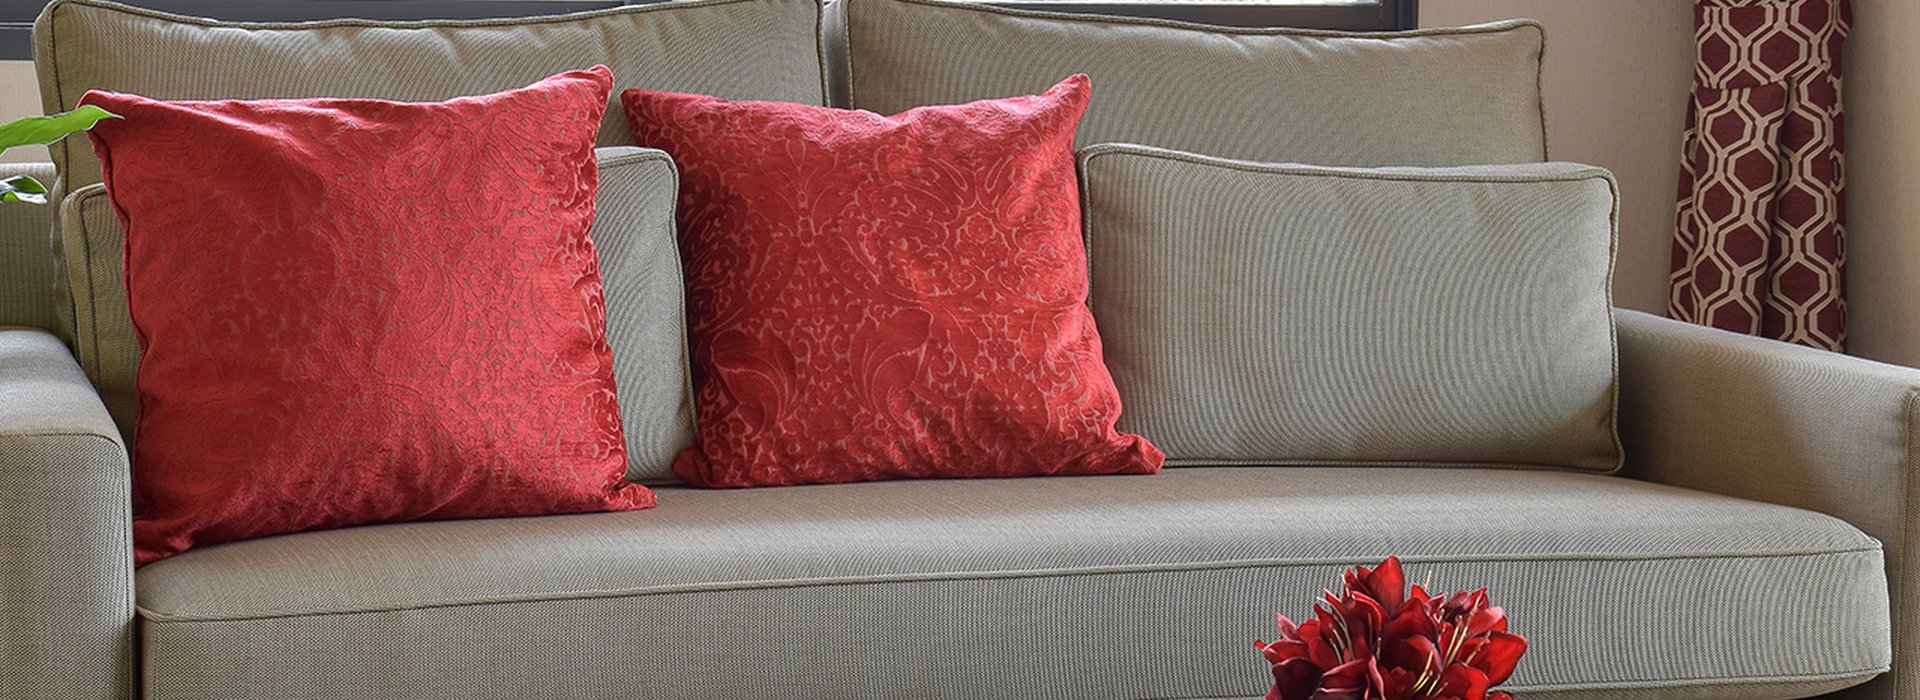 comfortable sofa with red pillows and red book on table